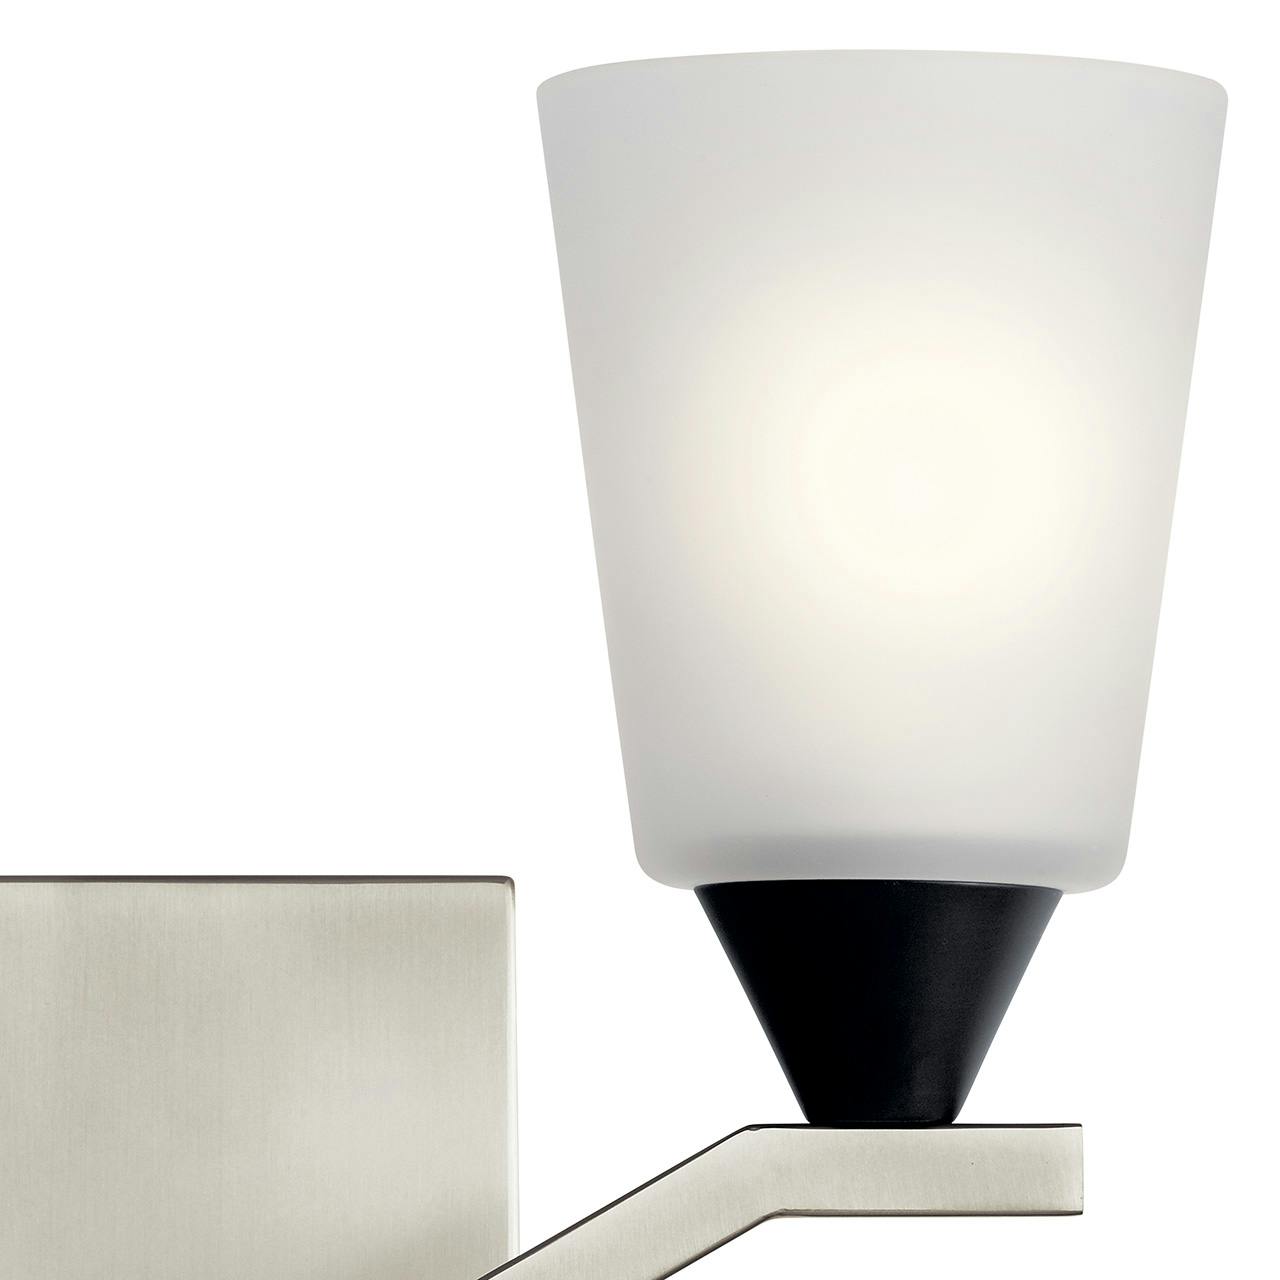 Close up view of the Skagos 2 Light Vanity Light Nickel on a white background